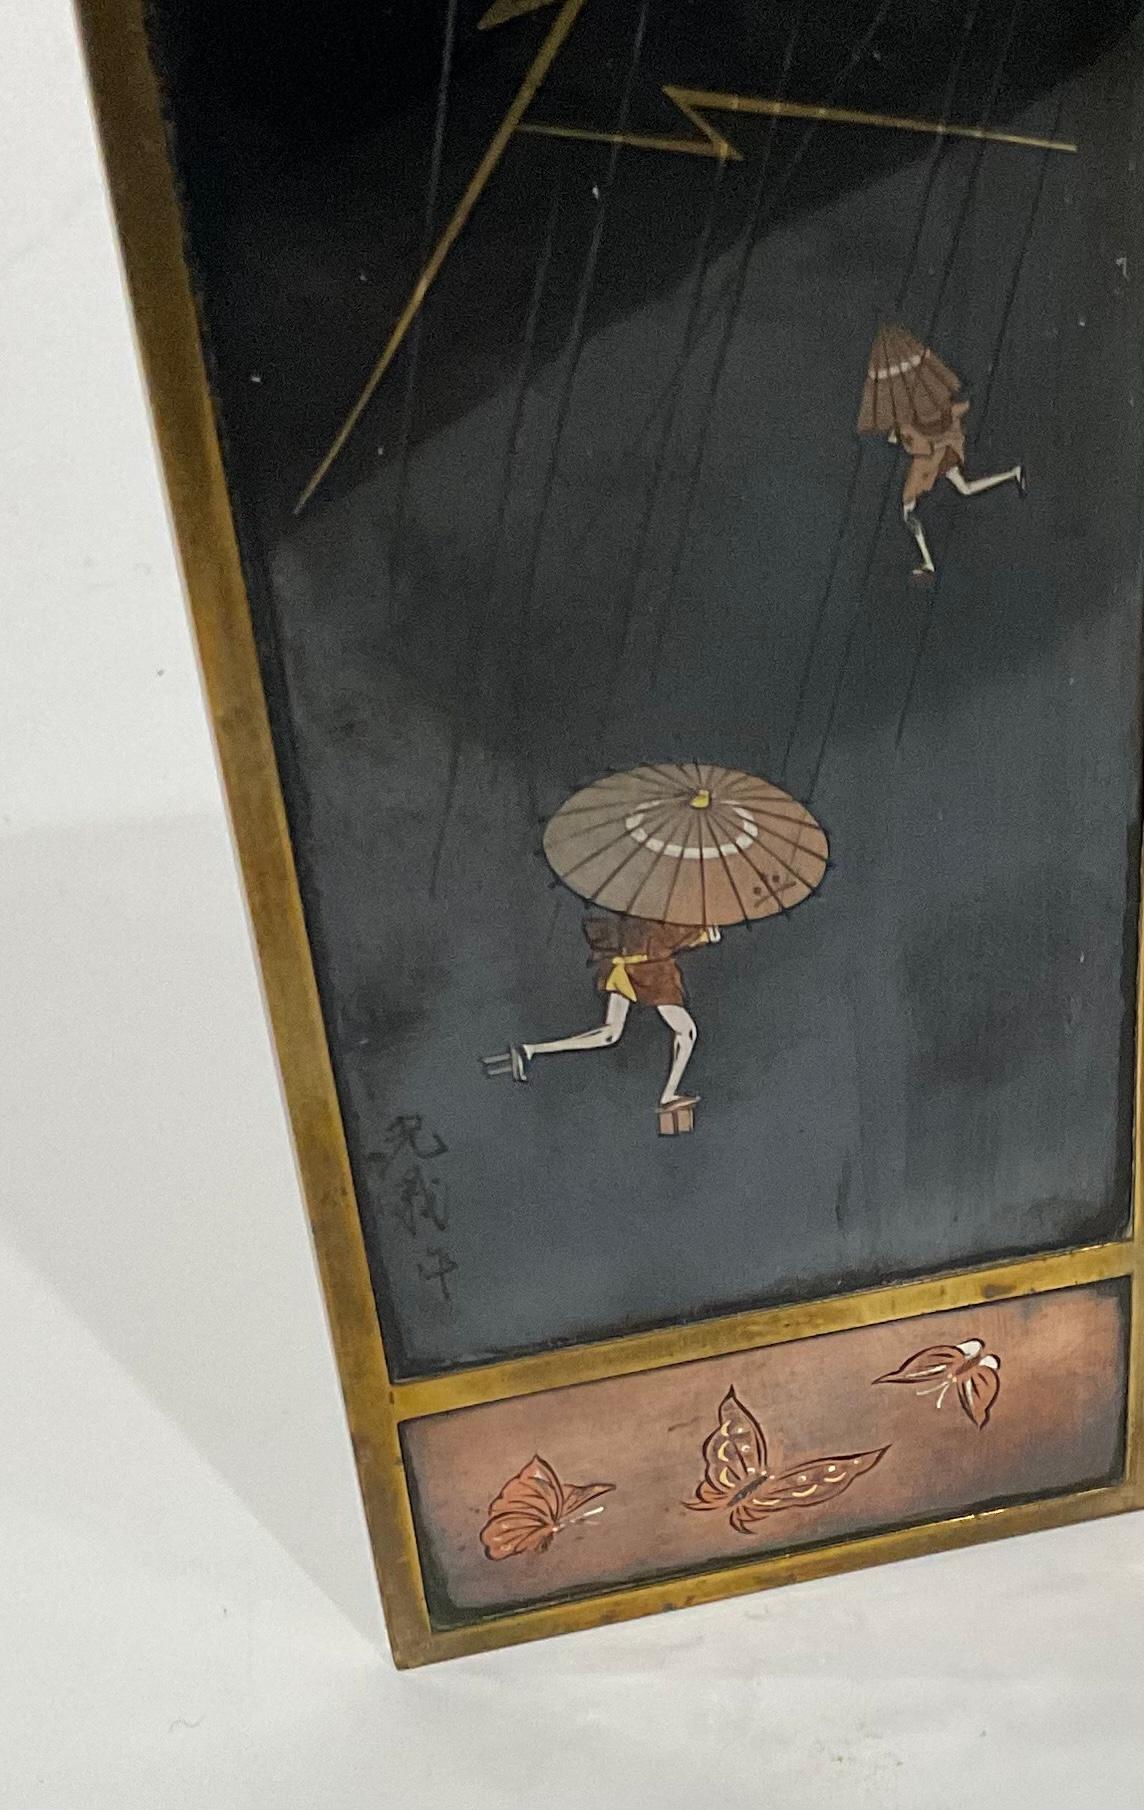 A good Japanese bronze and shakudo miniature table screen, Meiji period, each panel in a gilt bronze frame, one panel depicts figures caught in a rainstorm with lightning, signed lower left, a panel of chrysanthemums, a panel has a female with